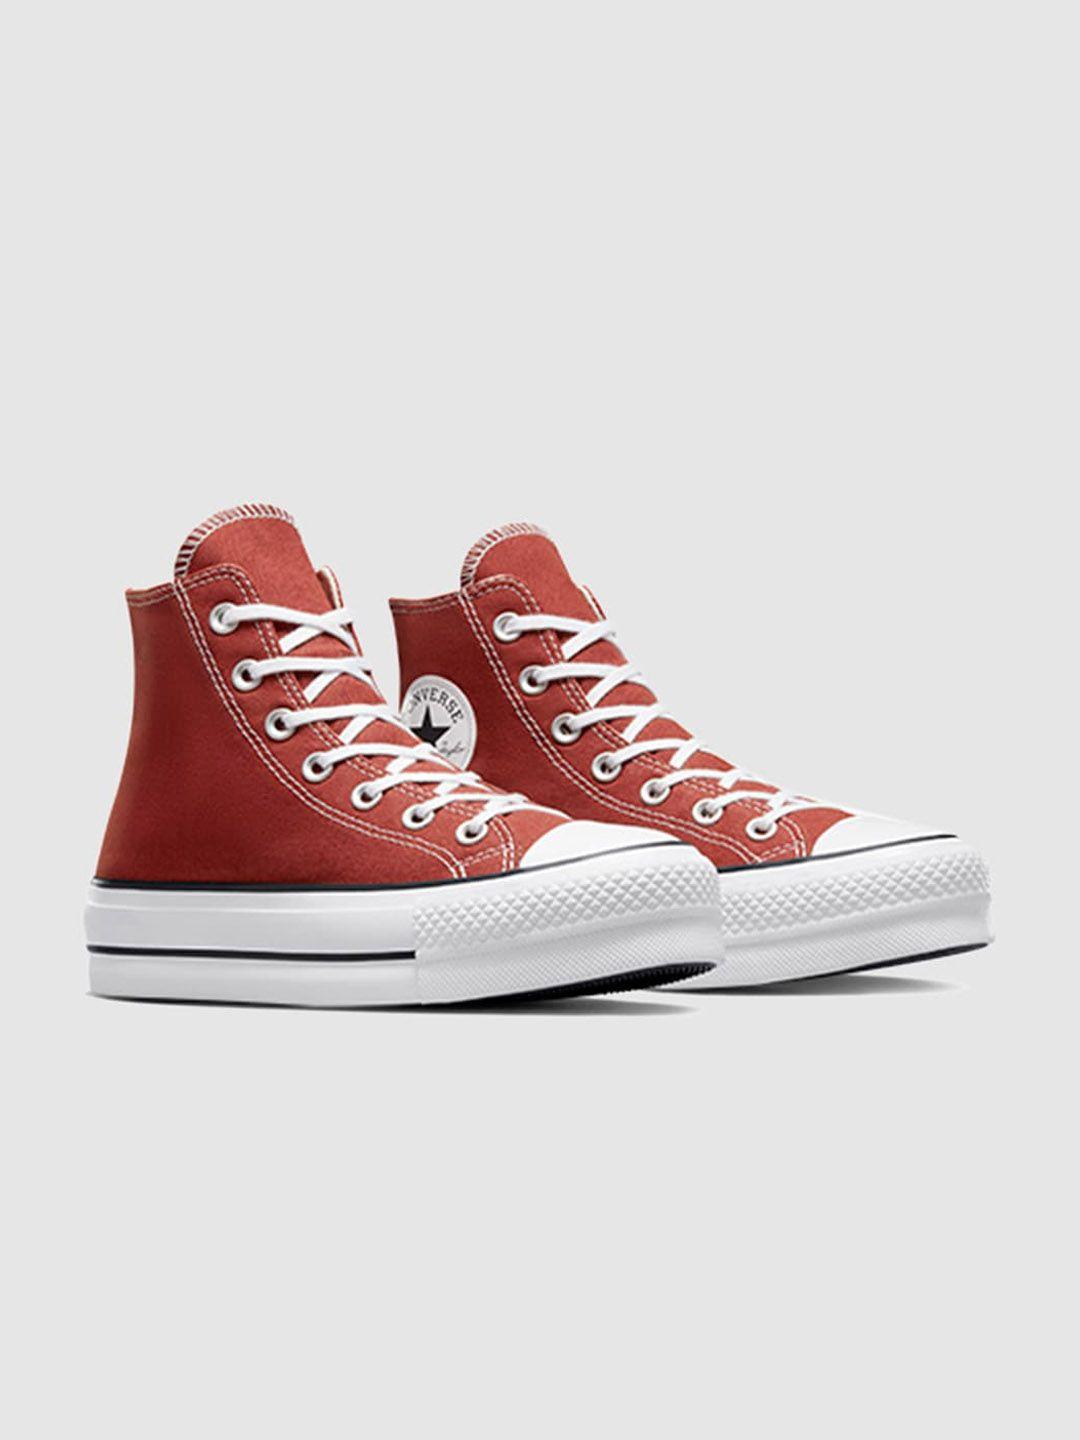 converse women round toe mid-top canvas sneakers